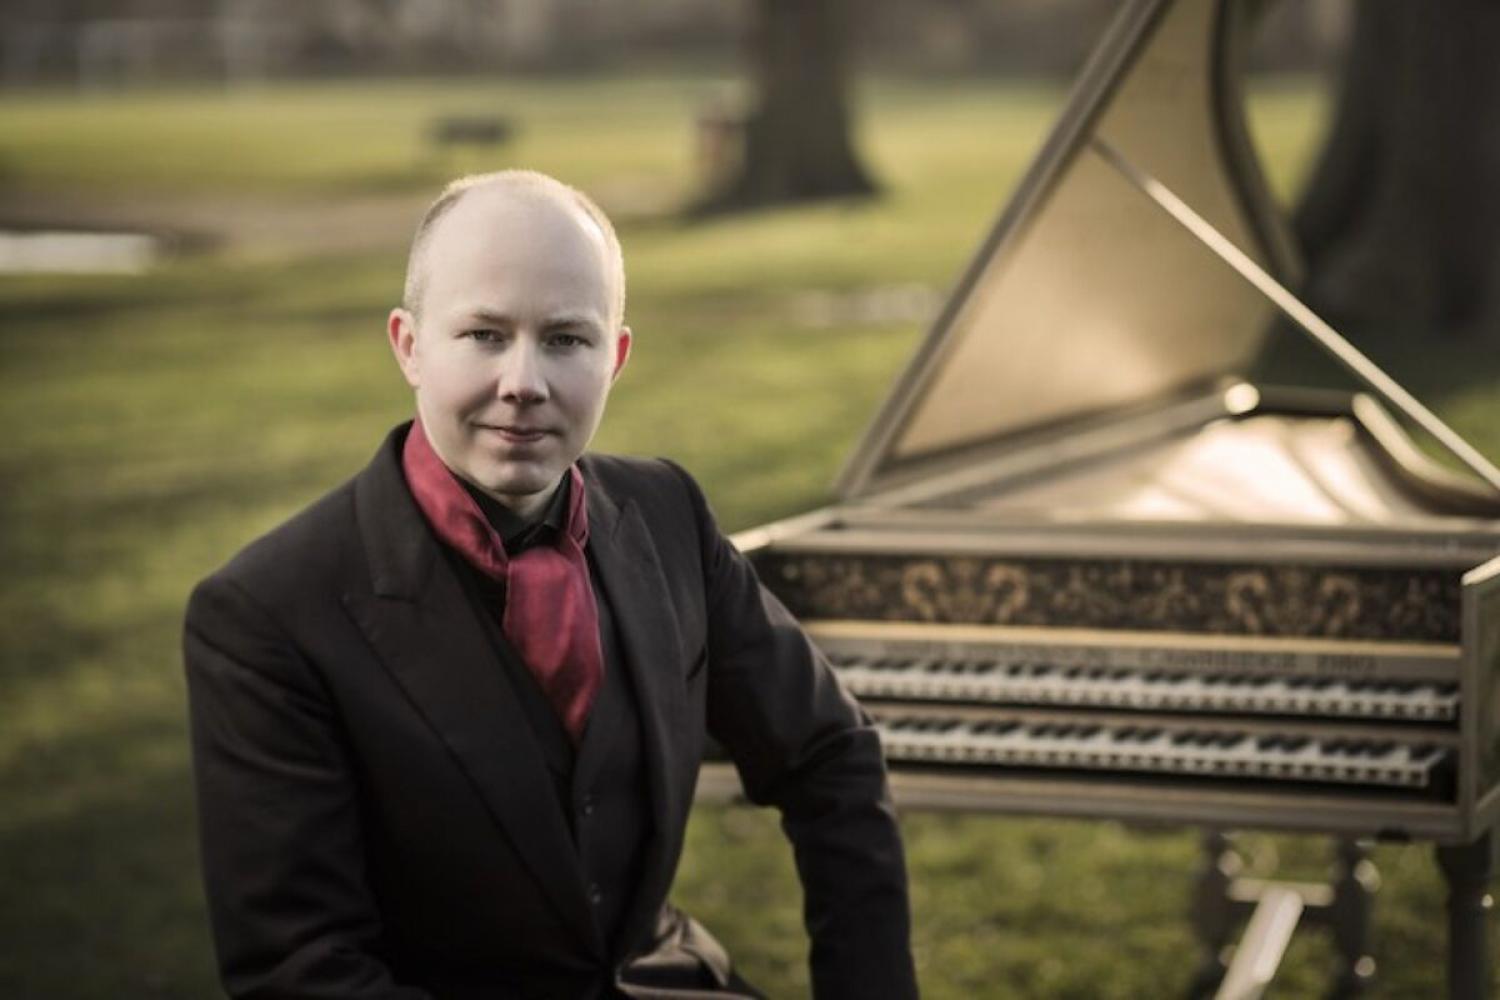 Sensual and mysterious: The secret world of the harpsichord Pawel Siwczak